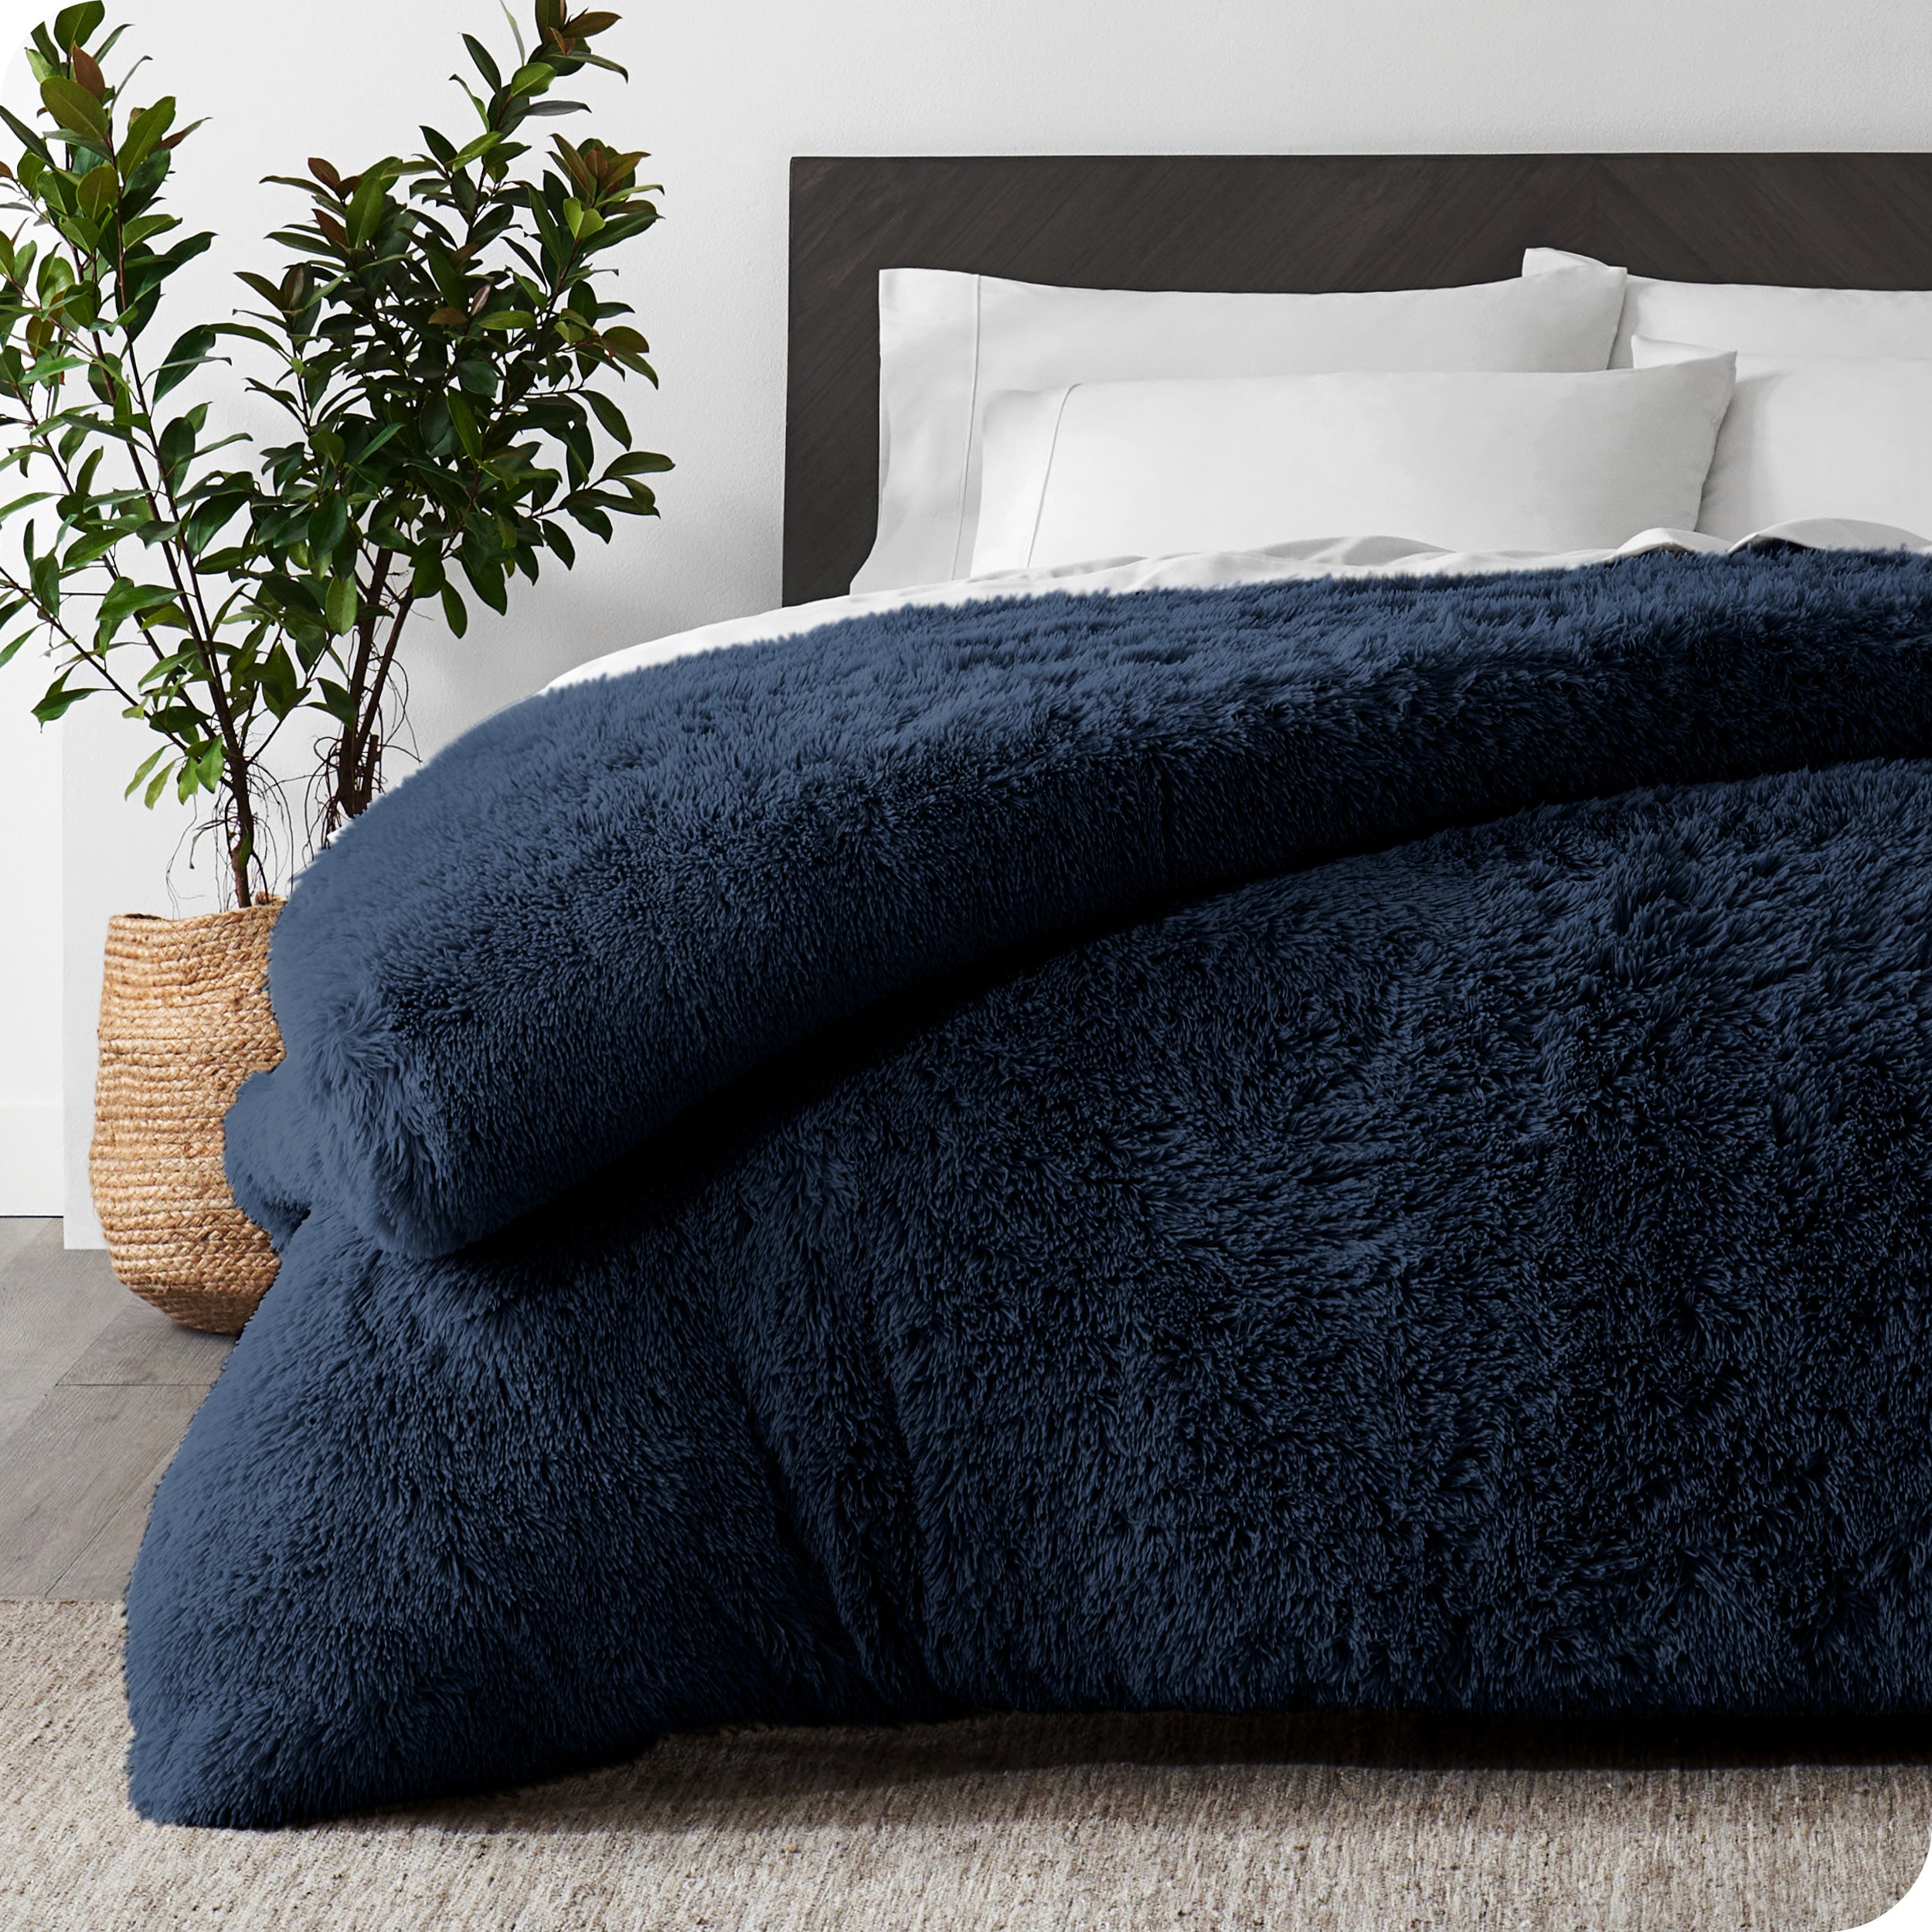 A dark blue shaggy duvet cover on a bed with white sheets and pillowcases. A large plant is next to the bed.